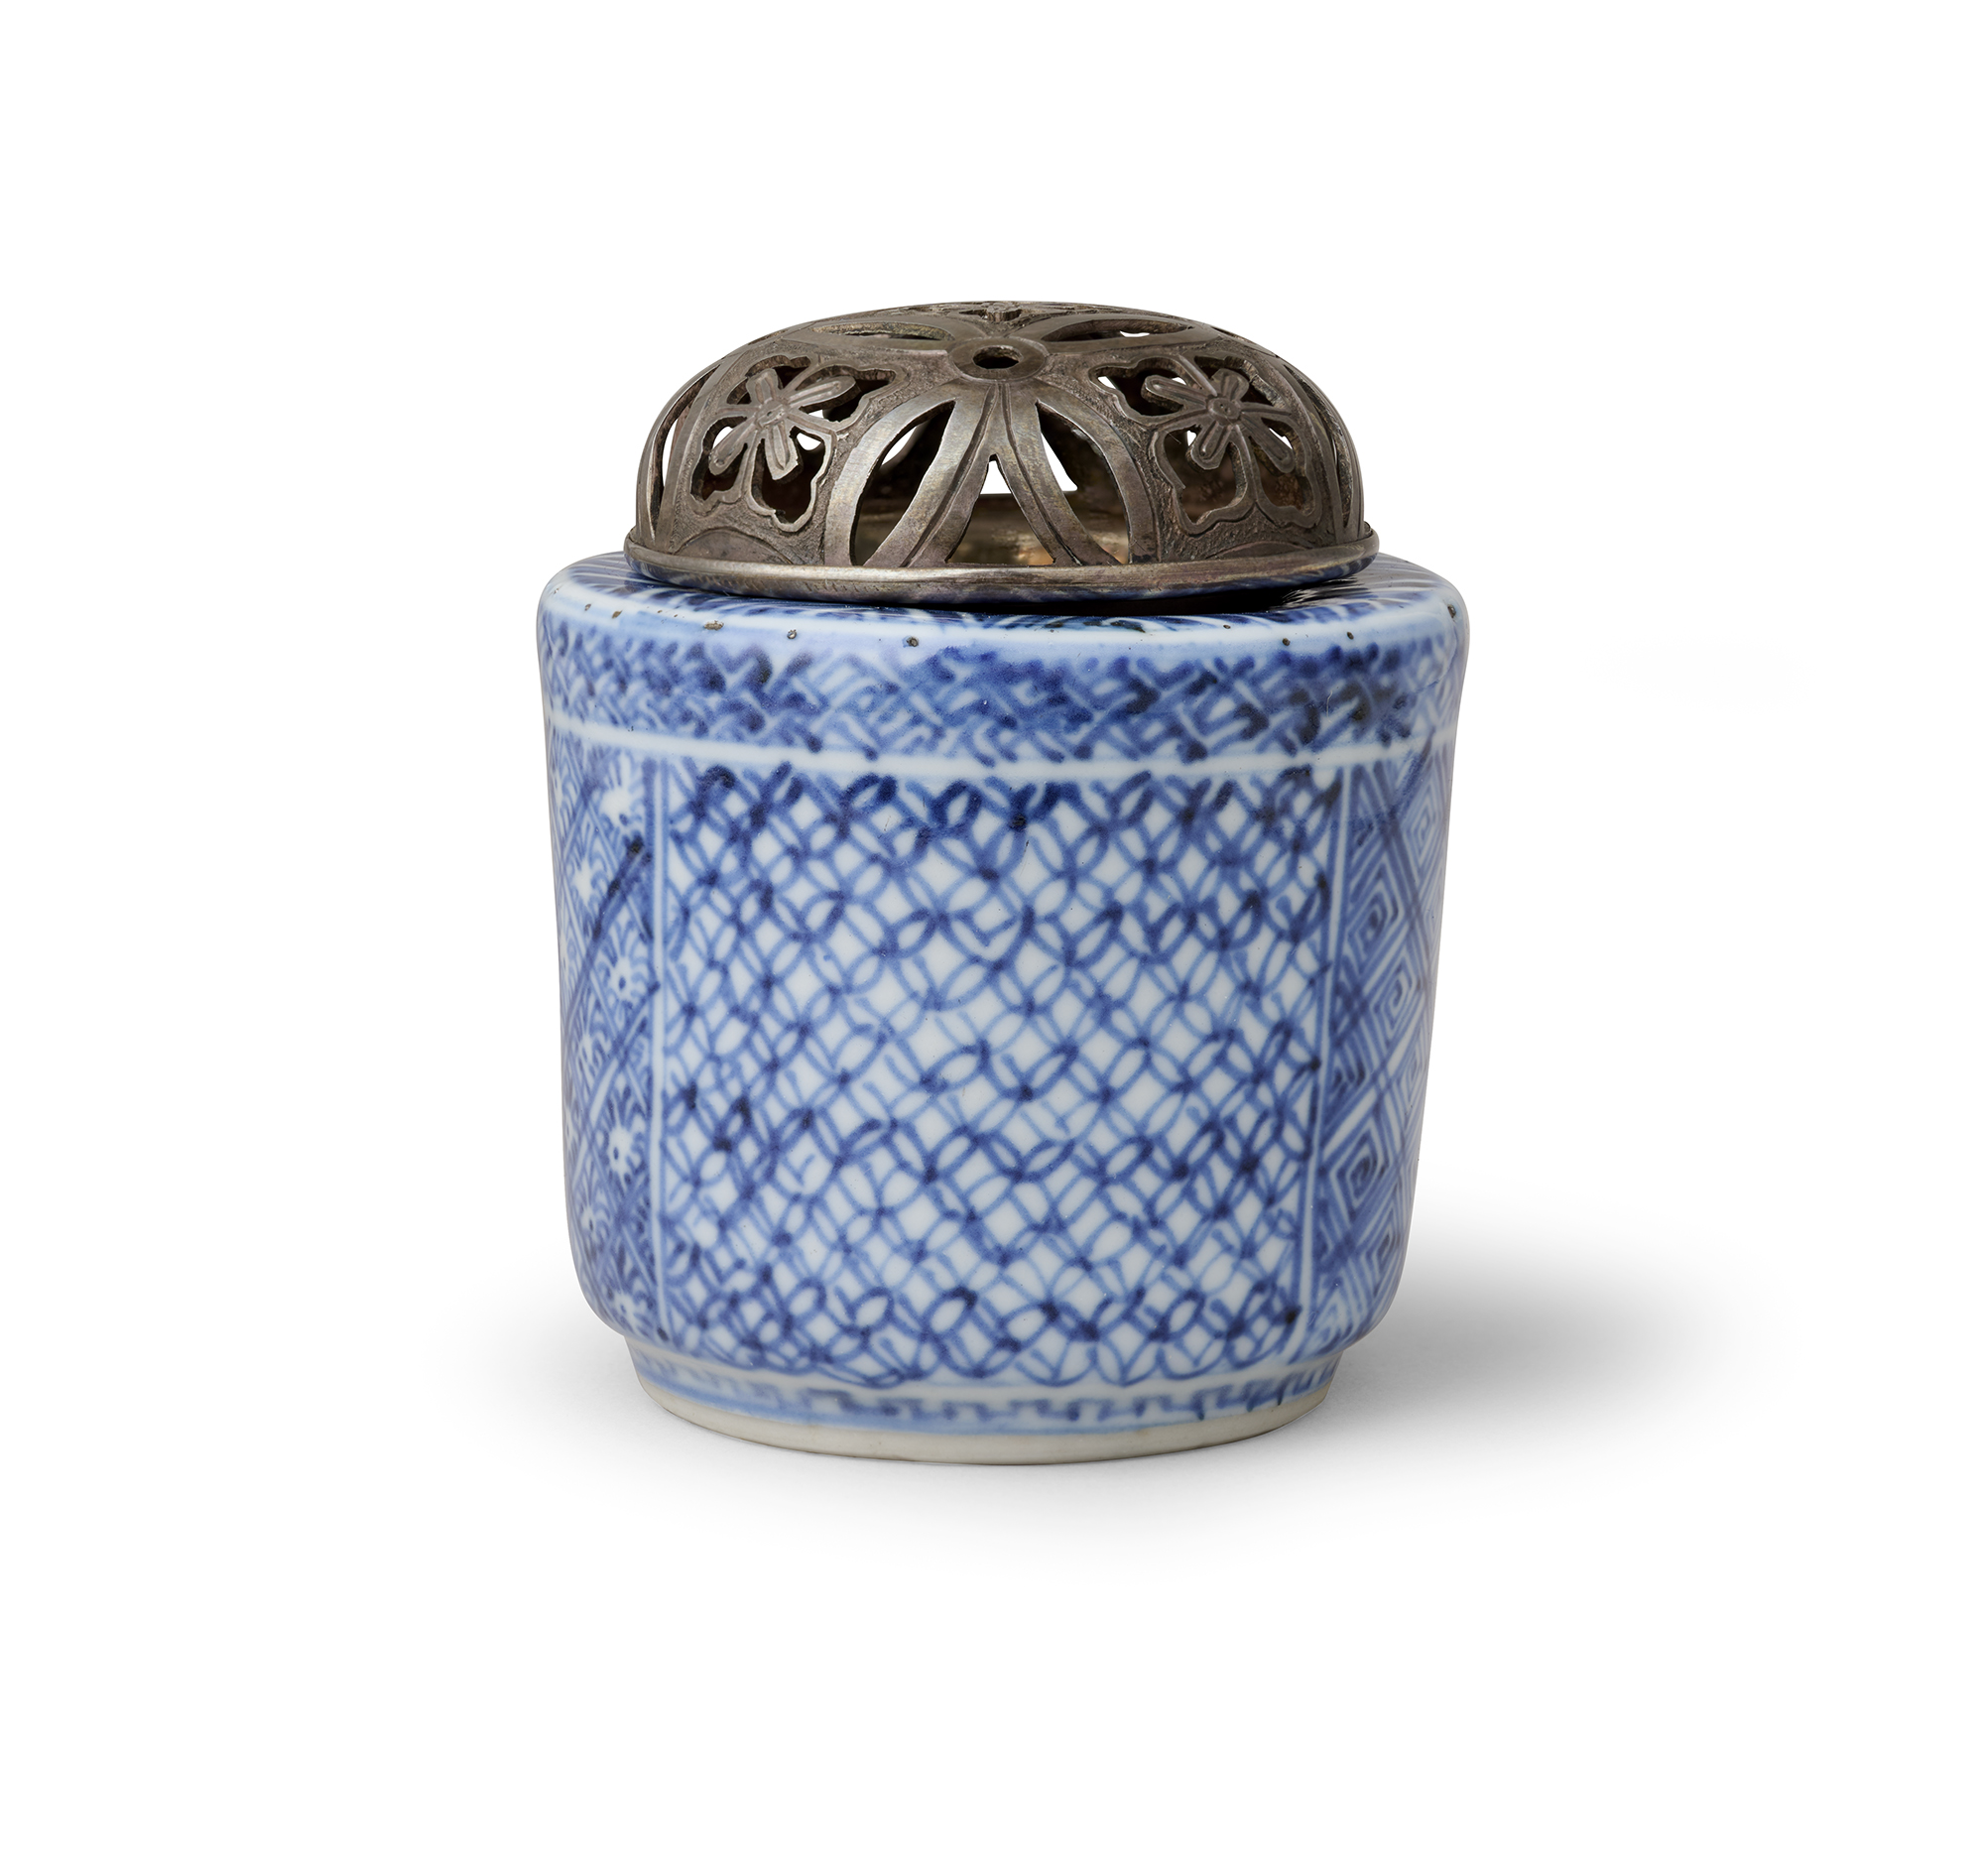 A CHINESE BLUE AND WHITE PORCELAIN INCENSE BURNER, KORO, TIANQI PERIOD, 1621 – 1627